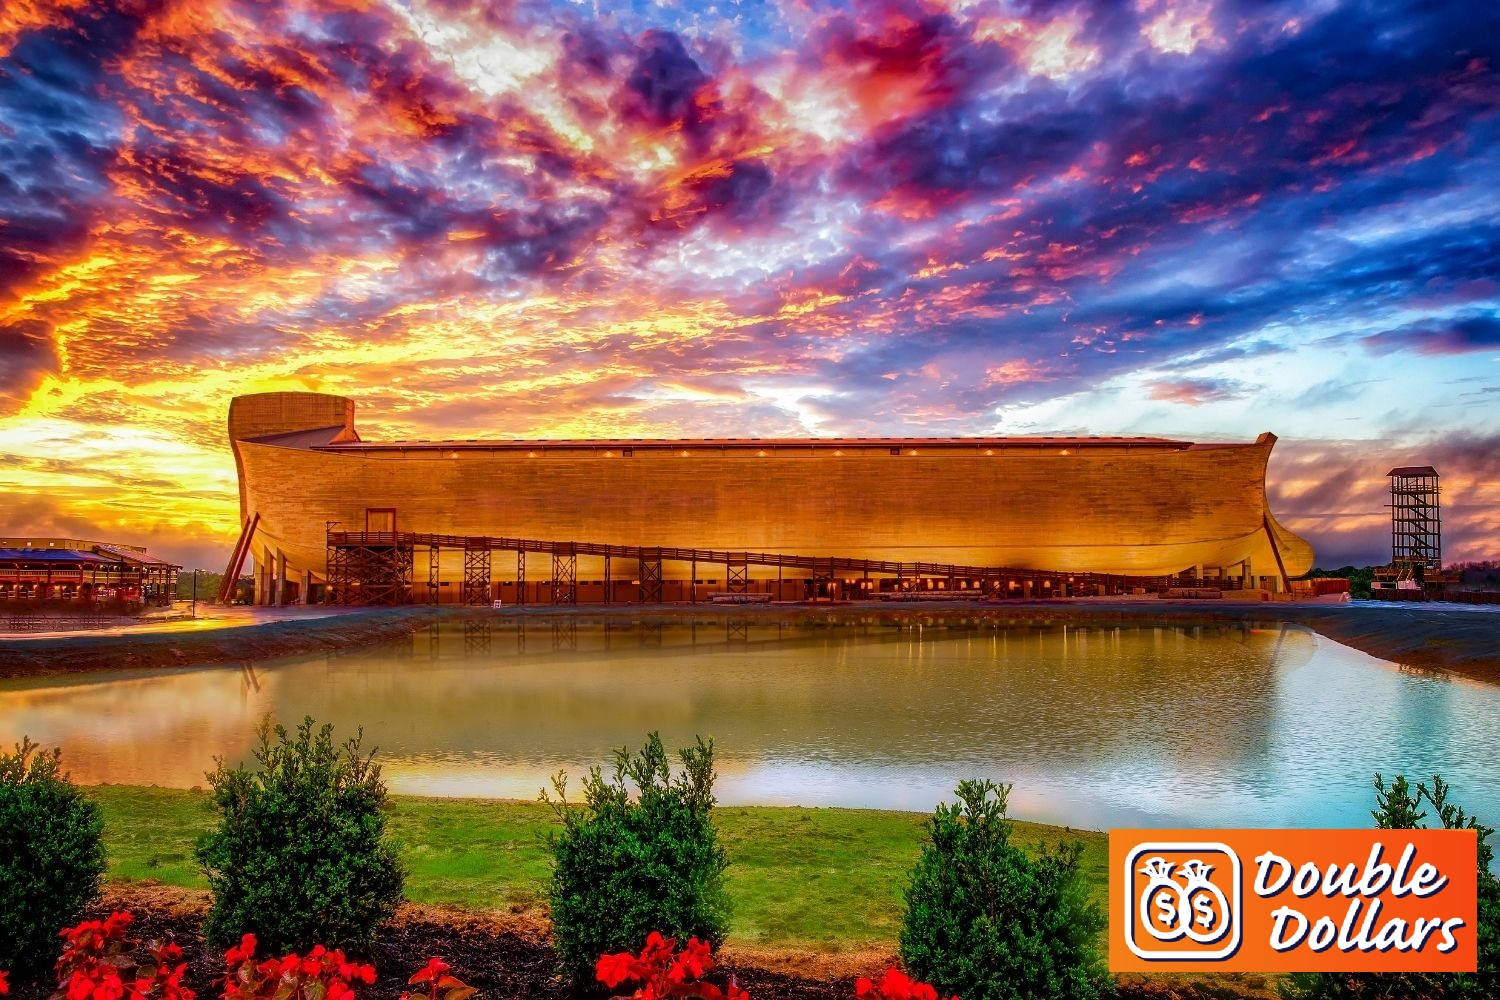 Ark Encounter and Creation Museum-October 10 - 13, 2022